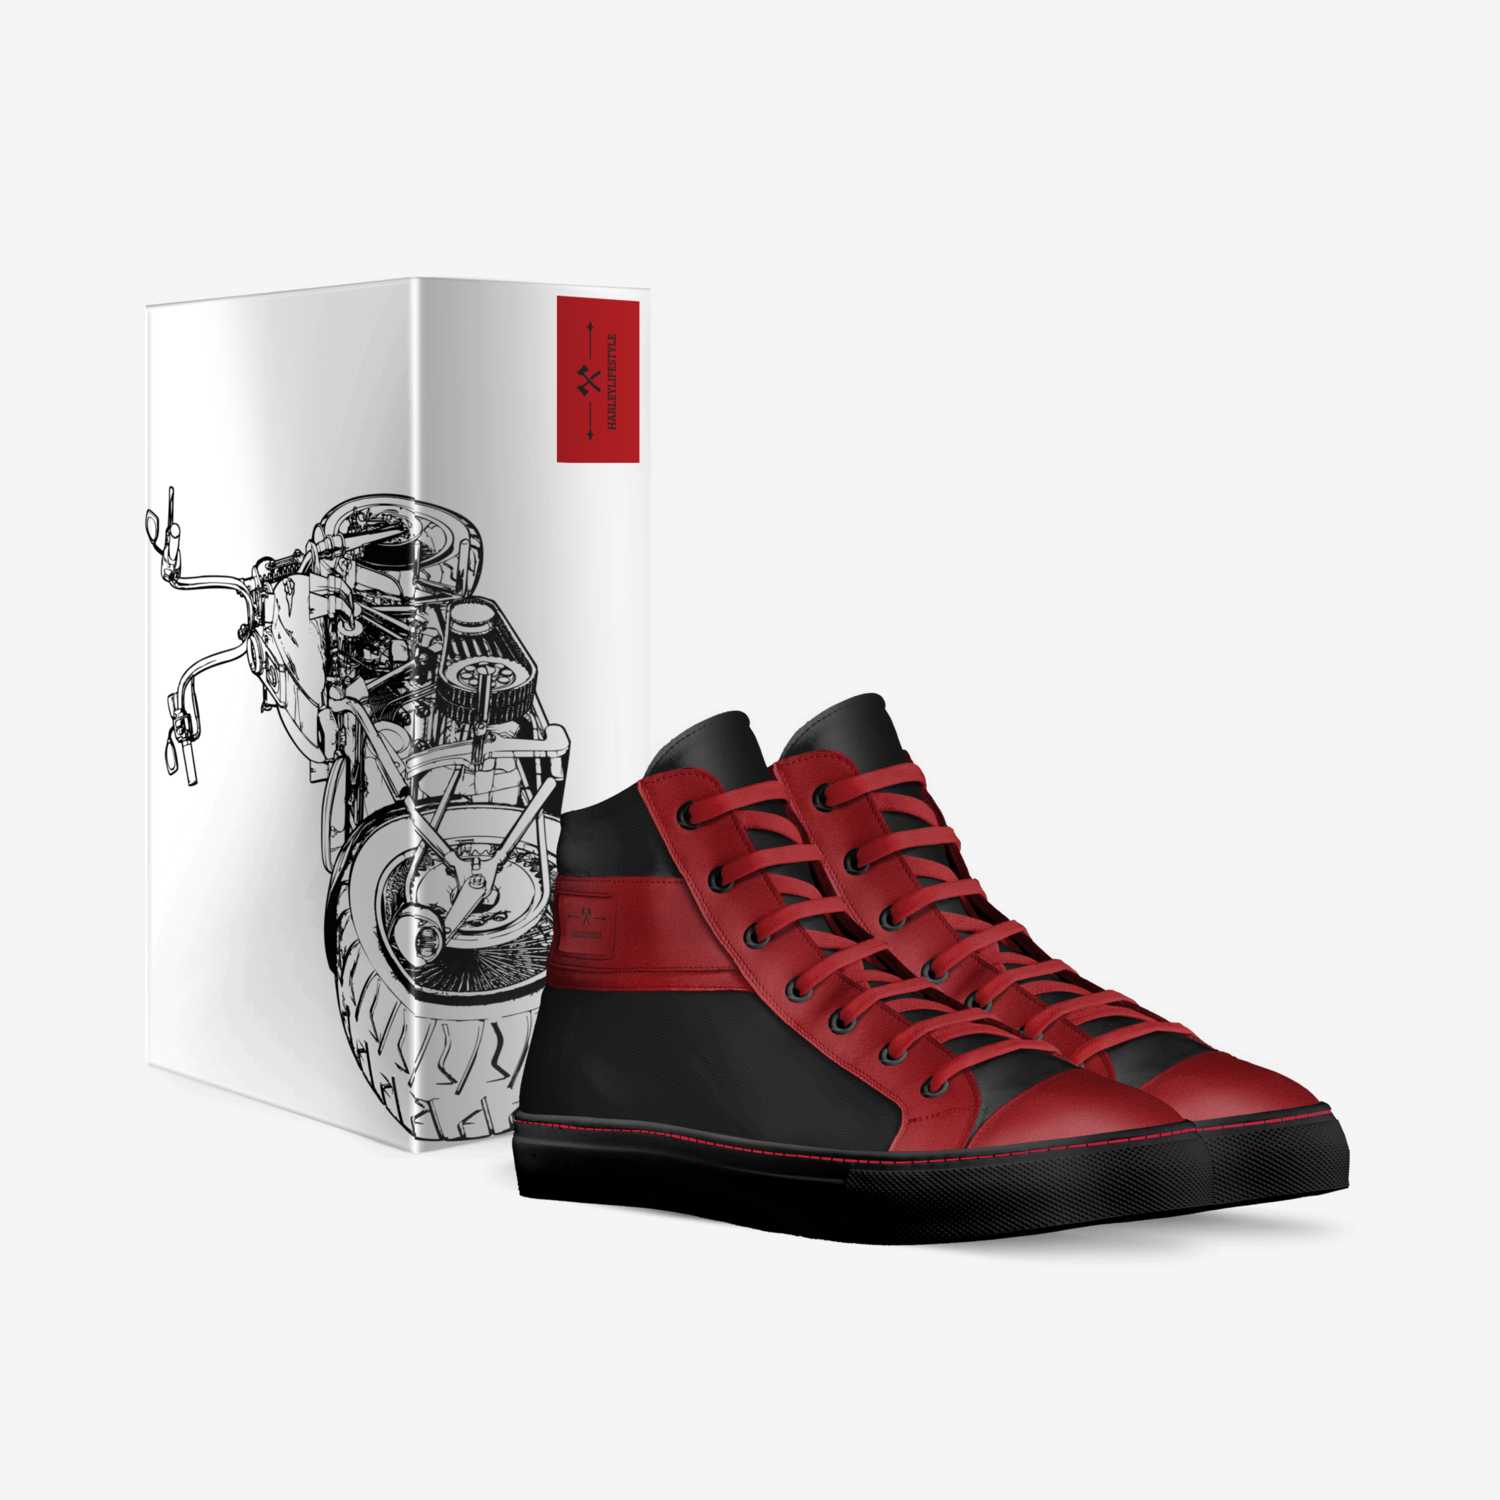 HarleyLifestyle custom made in Italy shoes by Shawn Barrickman | Box view